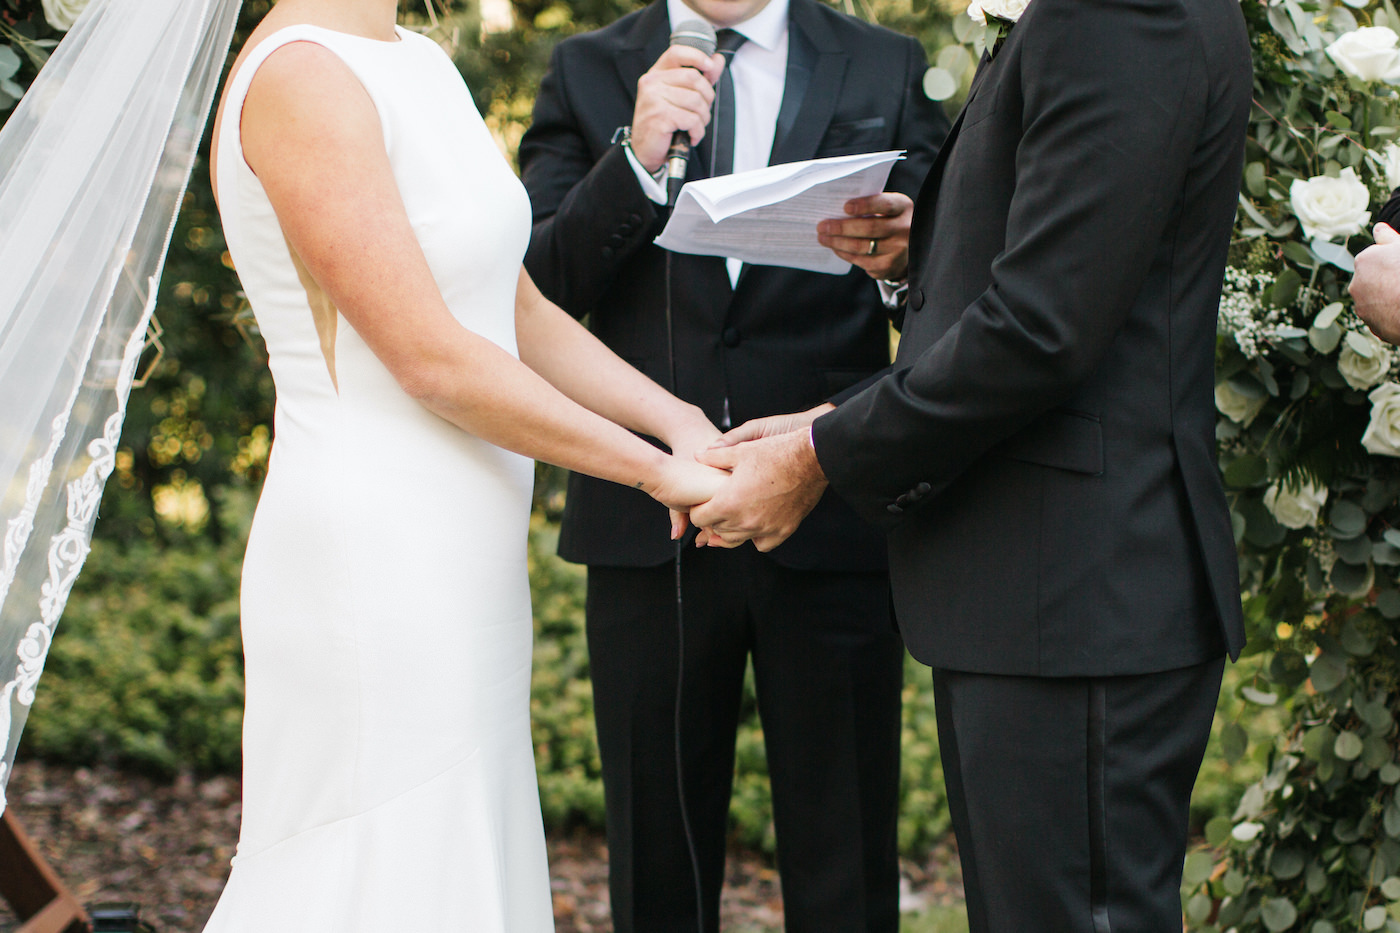 Bride and Groom Holding Hands while Exchanging Vows during Boho Chic Outdoor Wedding Ceremony